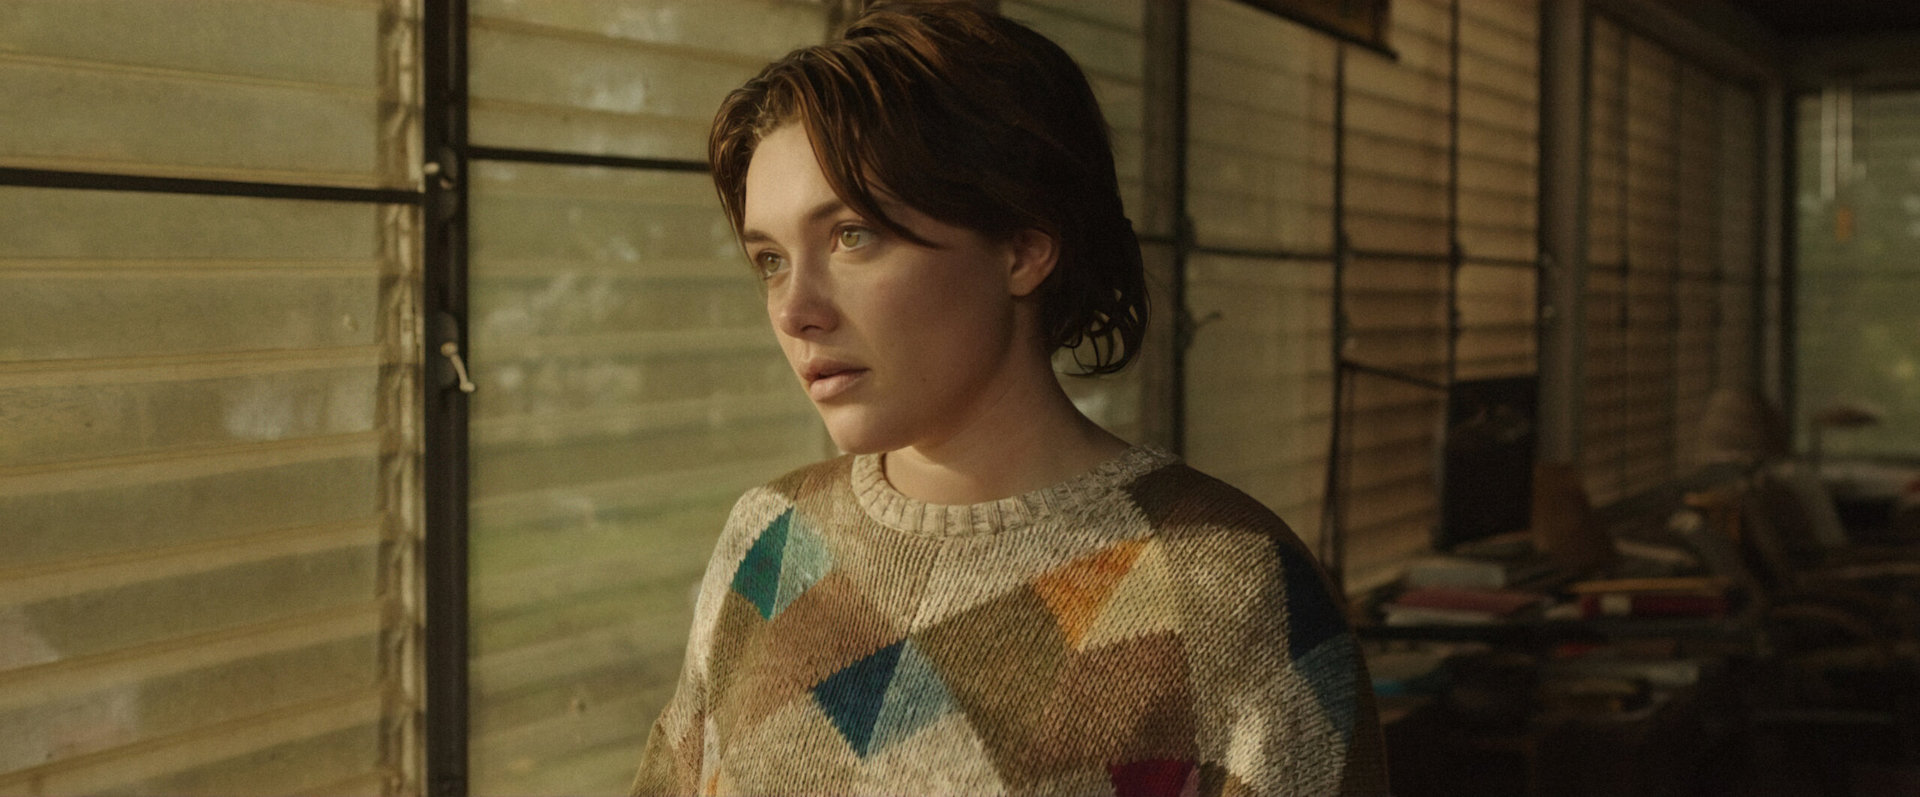 'A Good Person' will be starring the Academy Award nominee Florence Pugh and Academy Award winner Morgan Freeman. Look out for this movie in select theaters on March 24, and everywhere else on March 31.